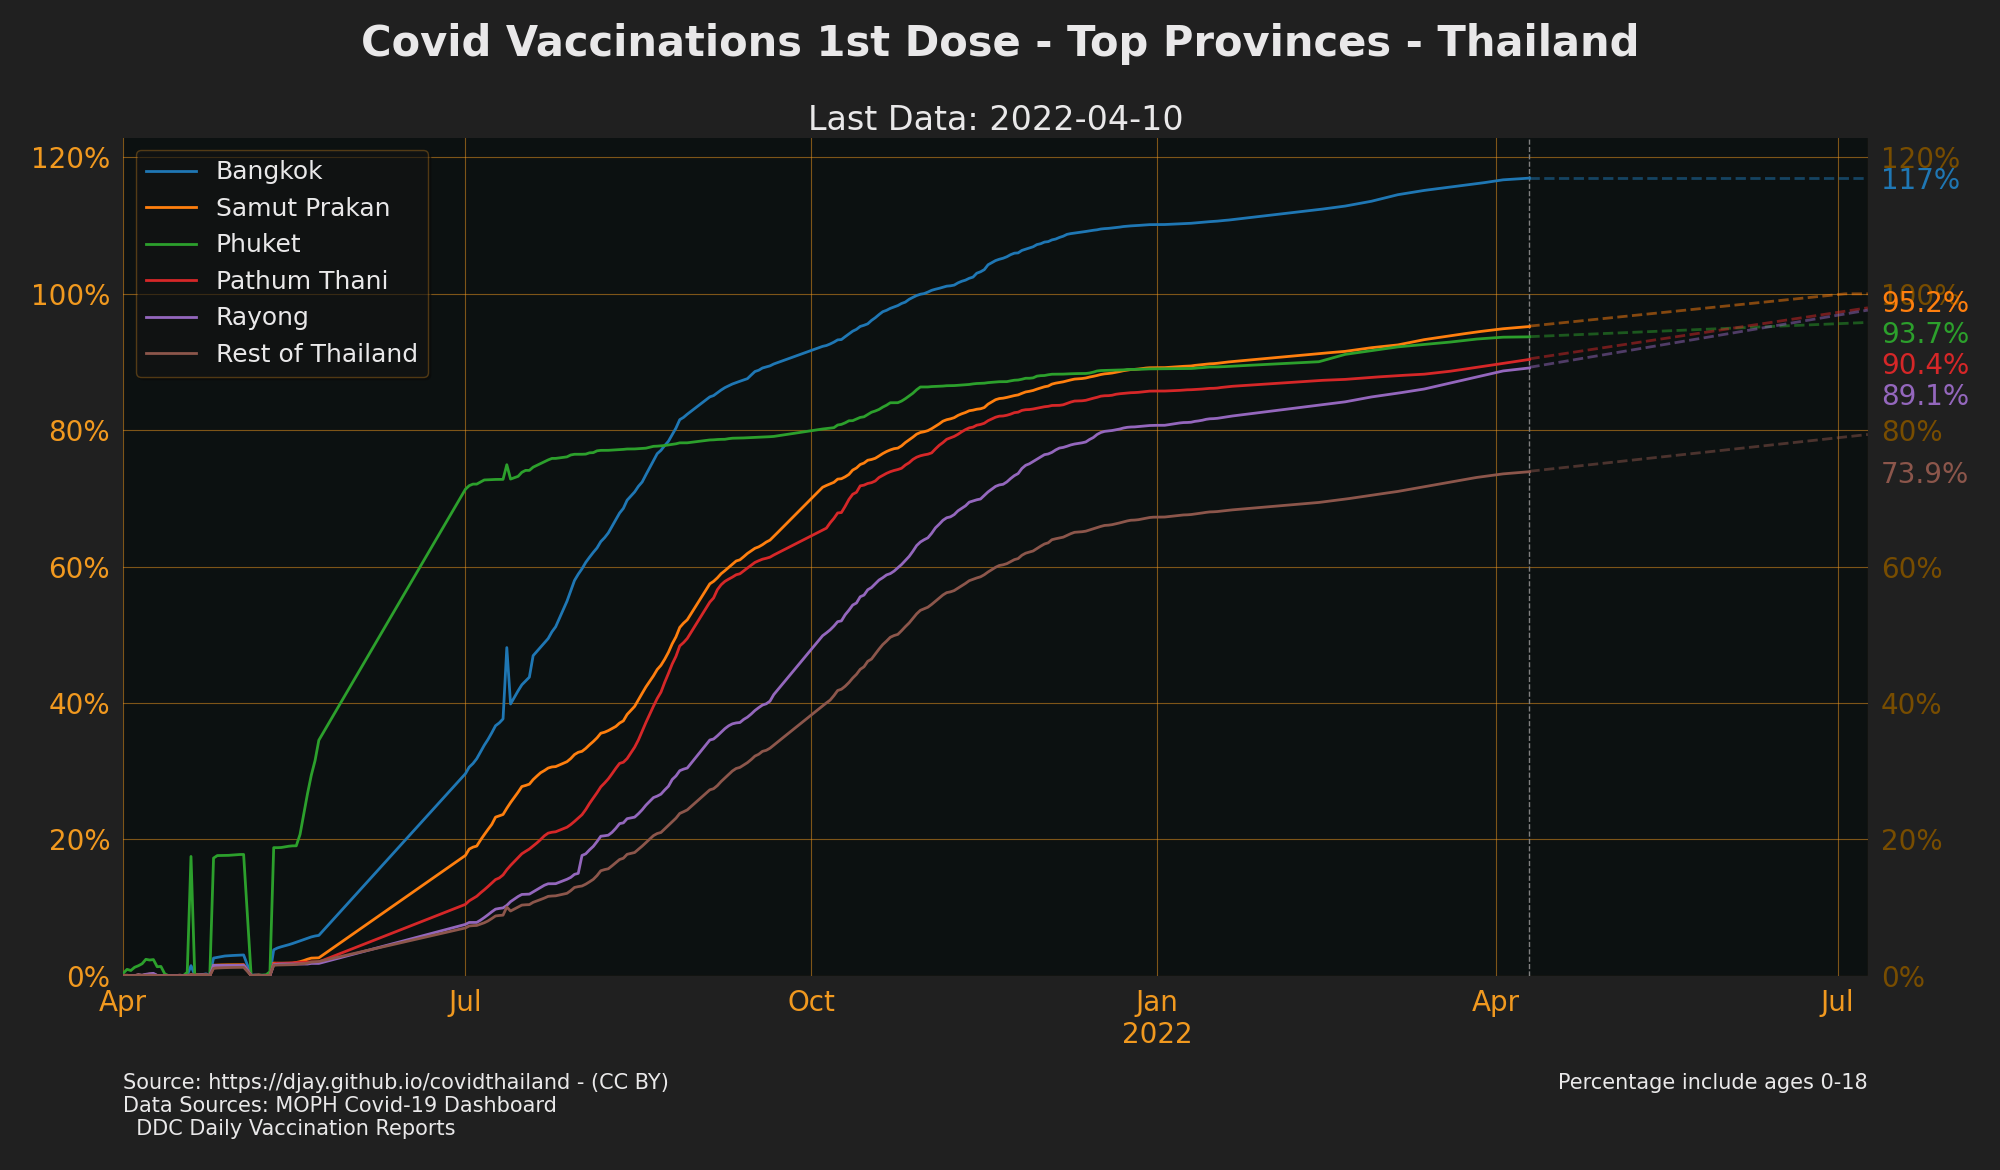 Top Provinces by Vaccination 1st Jab